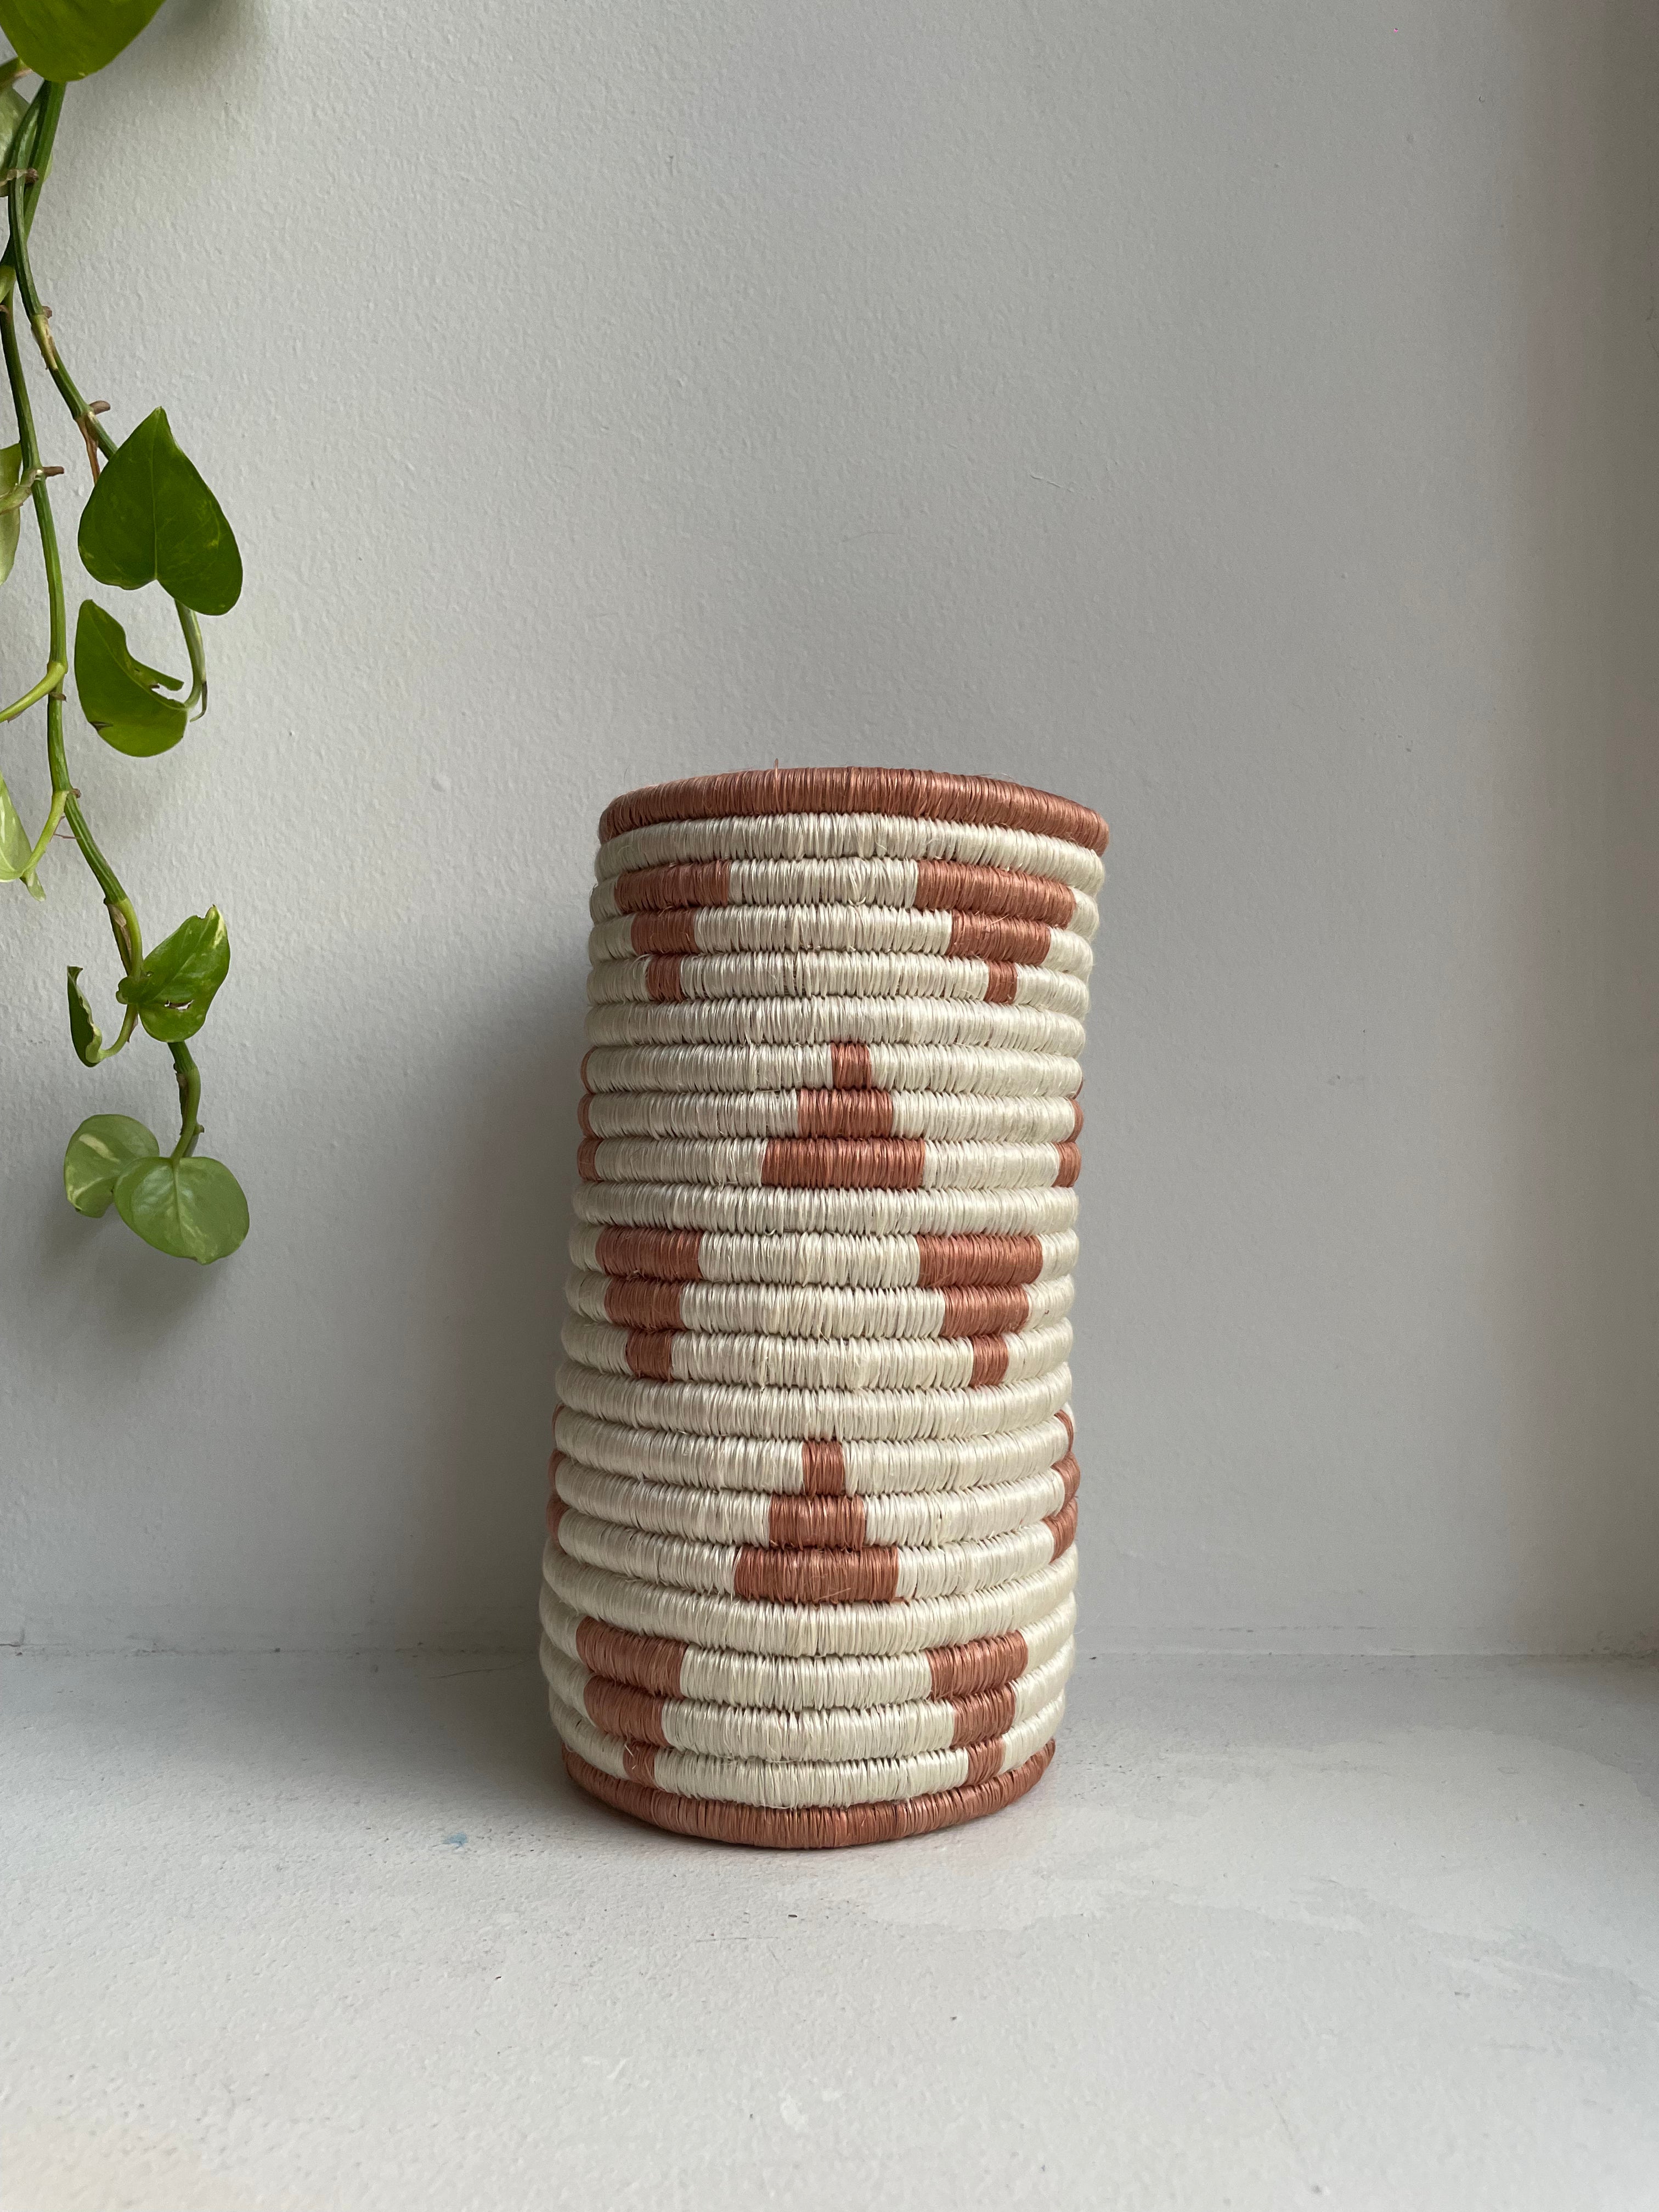 Display of white and cinnamon triangle vase